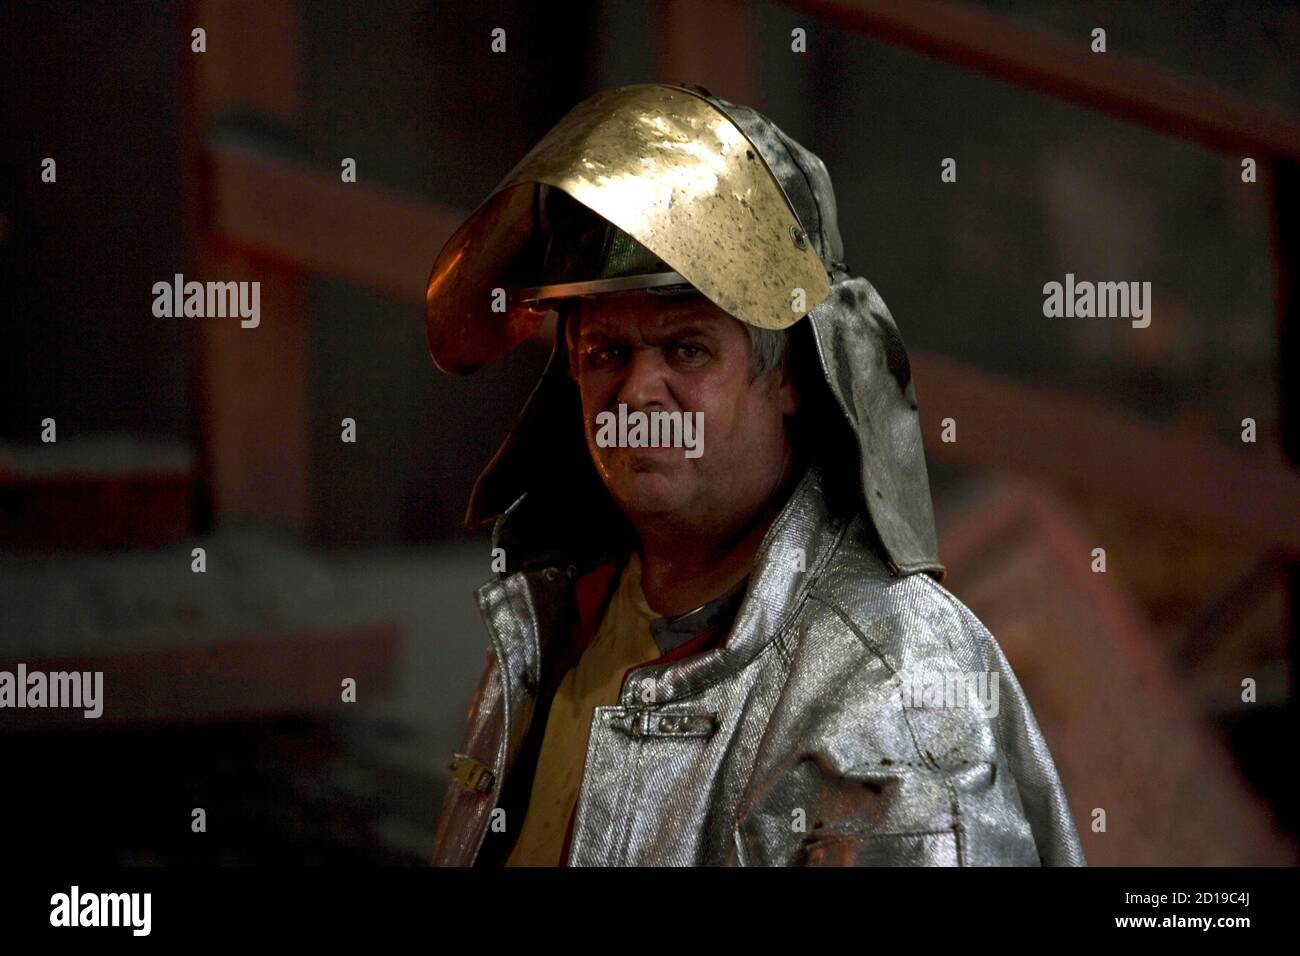 Blast Furnace 8 High Resolution Stock Photography and Images - Alamy